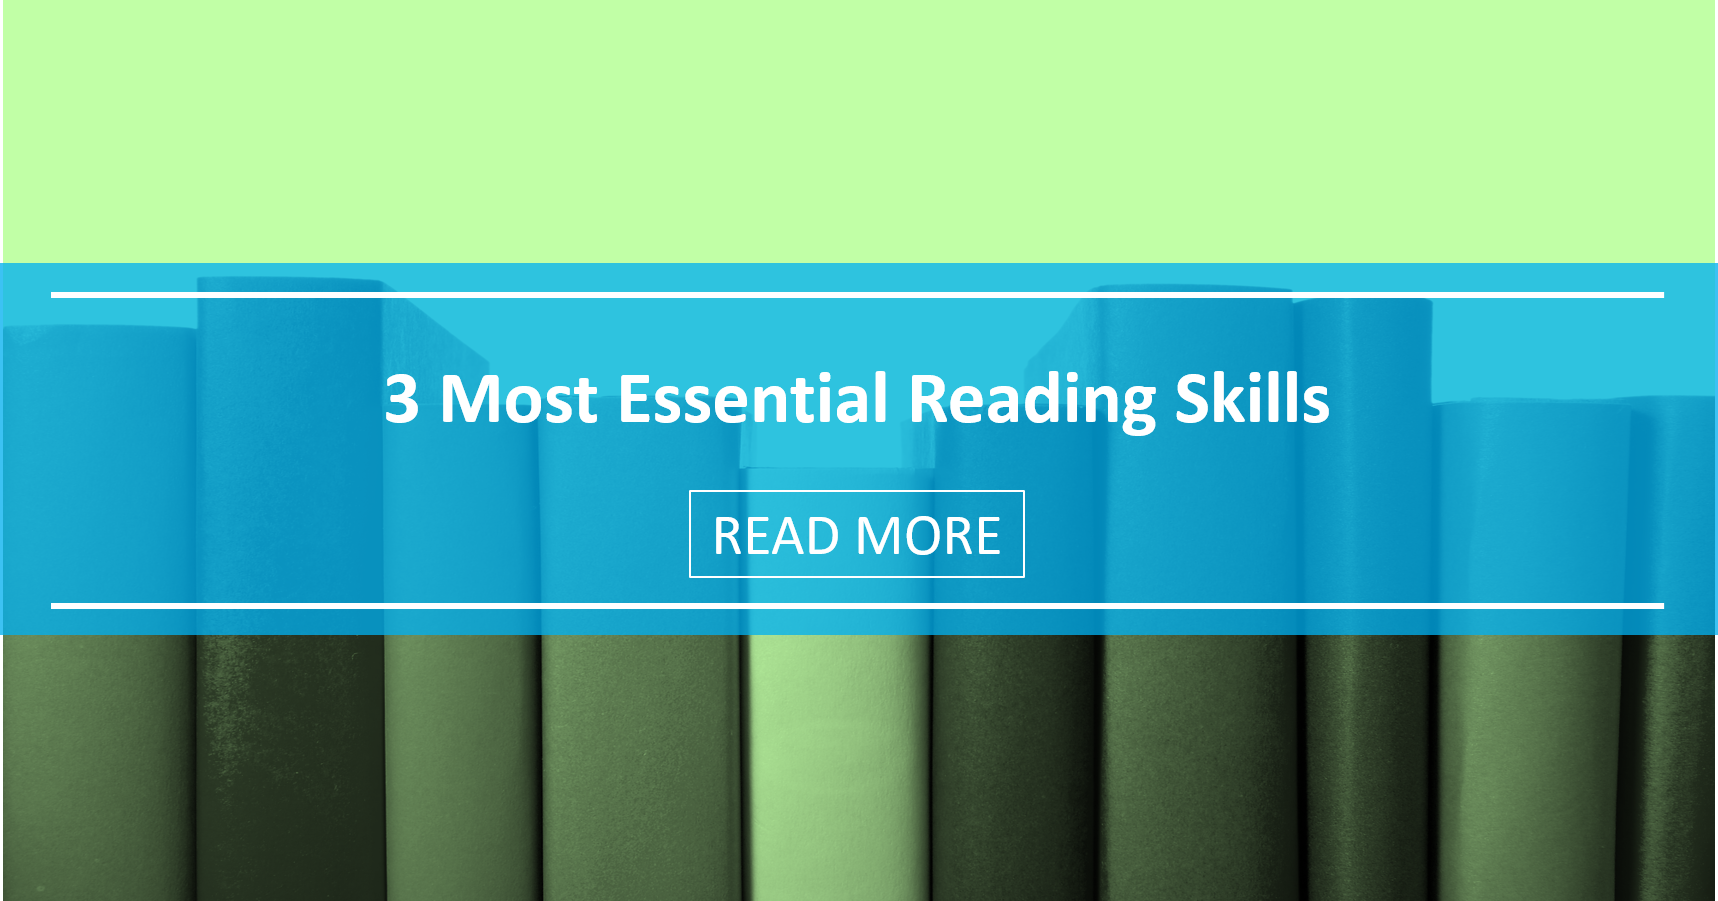 3 Most Essential Reading Skills Your Students Need